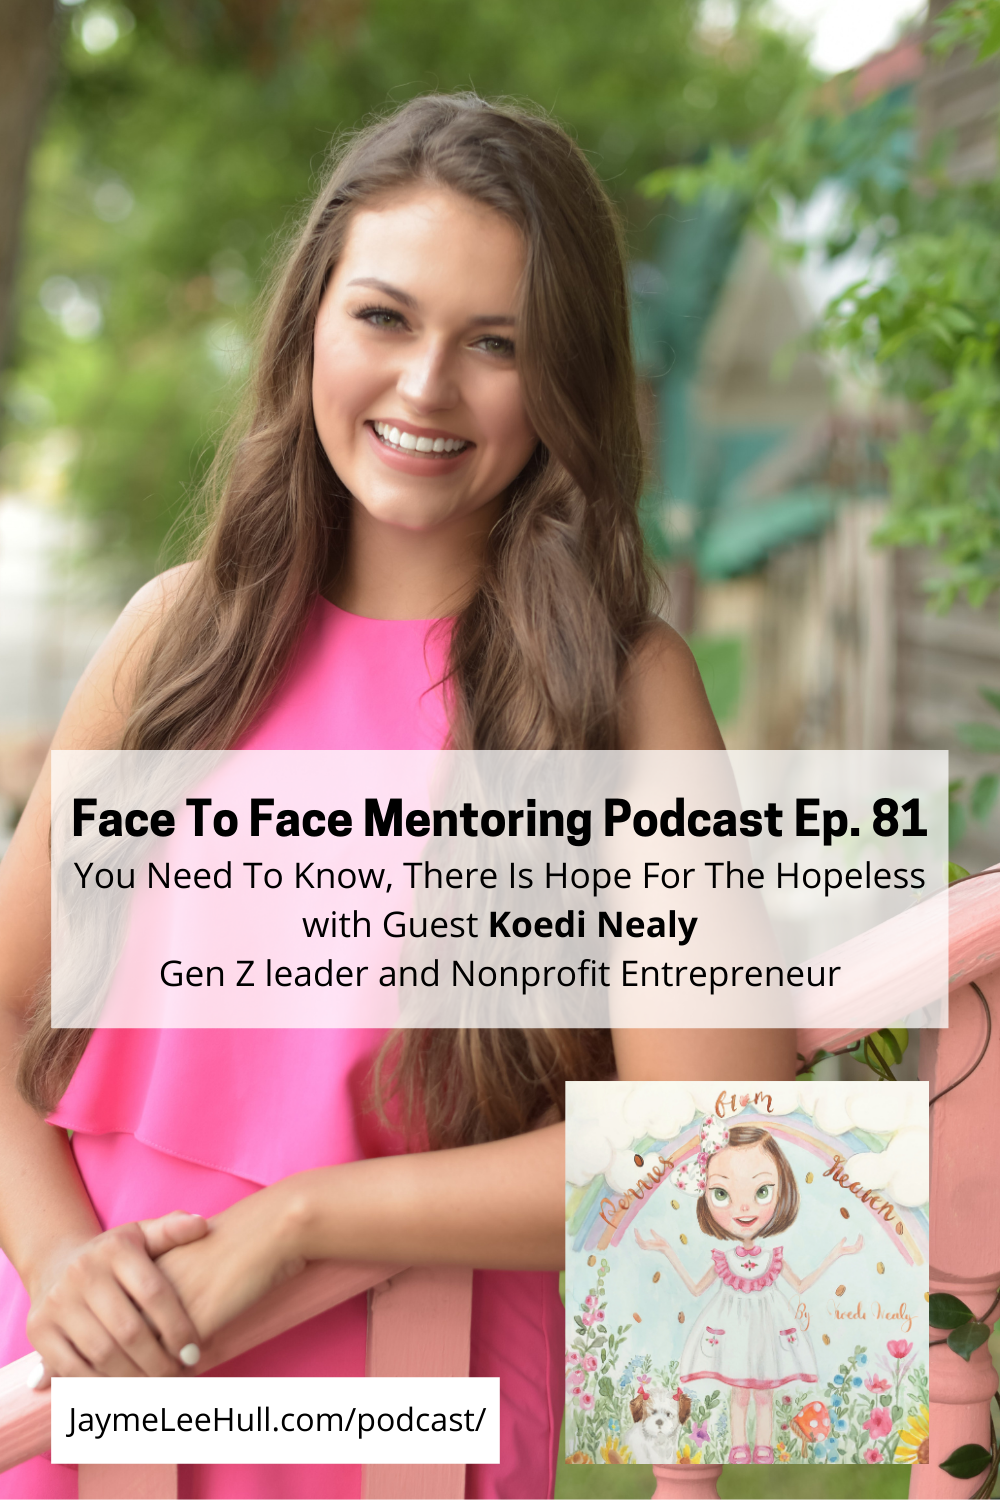 Today my guest, Koedi Nealy, 18 yr old founder of a Nonprofit, published author and inspiring leader for Generation Z, shares her God story and dream to help the Homeless. Don’t miss this incredibly inspirational story to follow God’s direction.